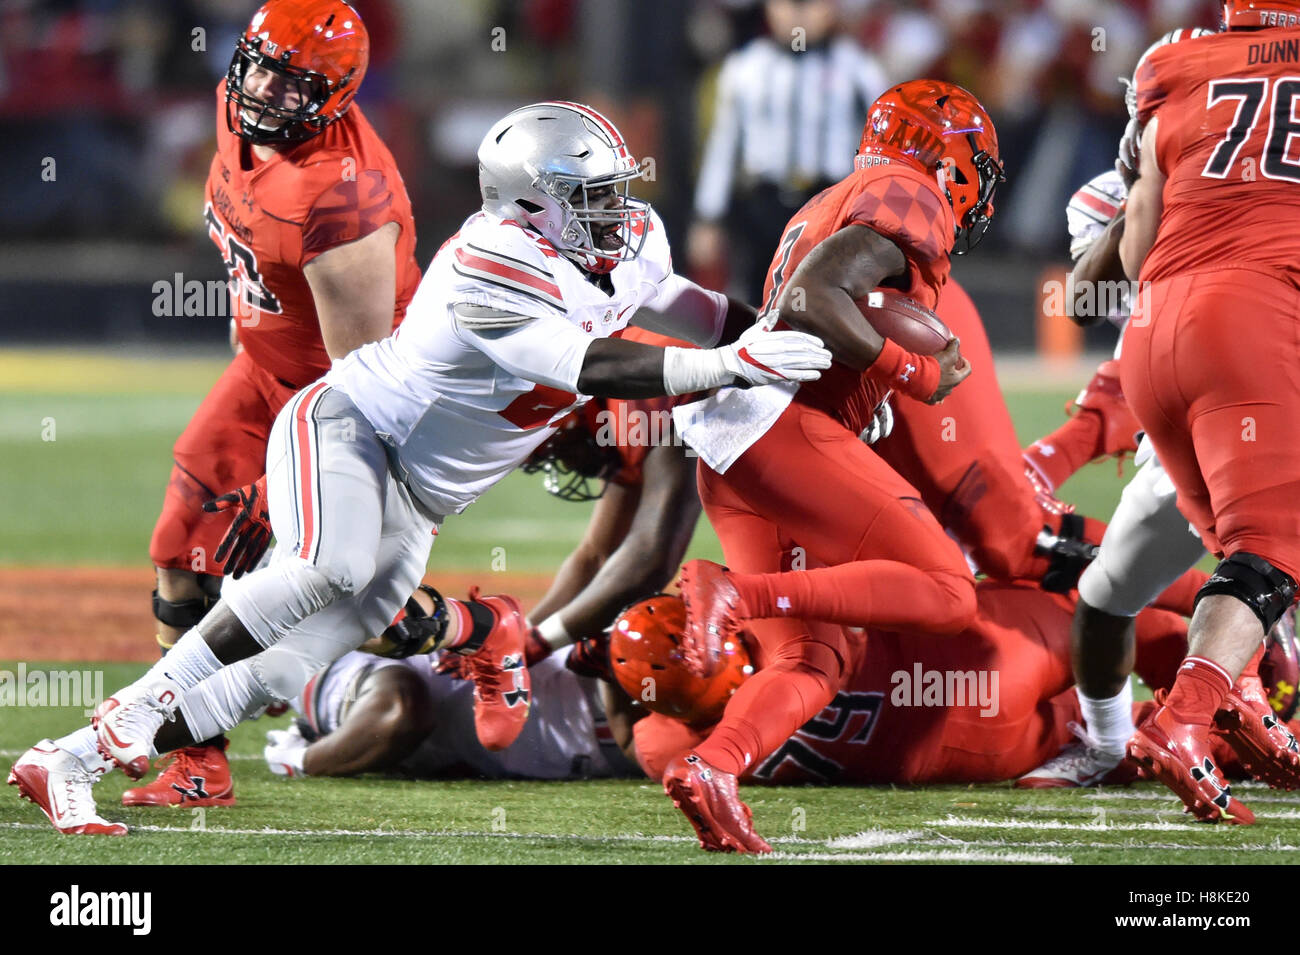 College Park, Maryland, USA. 12th Nov, 2016. Ohio State Buckeyes defensive lineman ROBERT LANDERS (67) tries to wrap up Maryland Terrapins quarterback TYRELL PIGROME (3) during a game played at Maryland Stadium at College Park, MD. Ohio State beat Maryland 62-3. © Ken Inness/ZUMA Wire/Alamy Live News Stock Photo